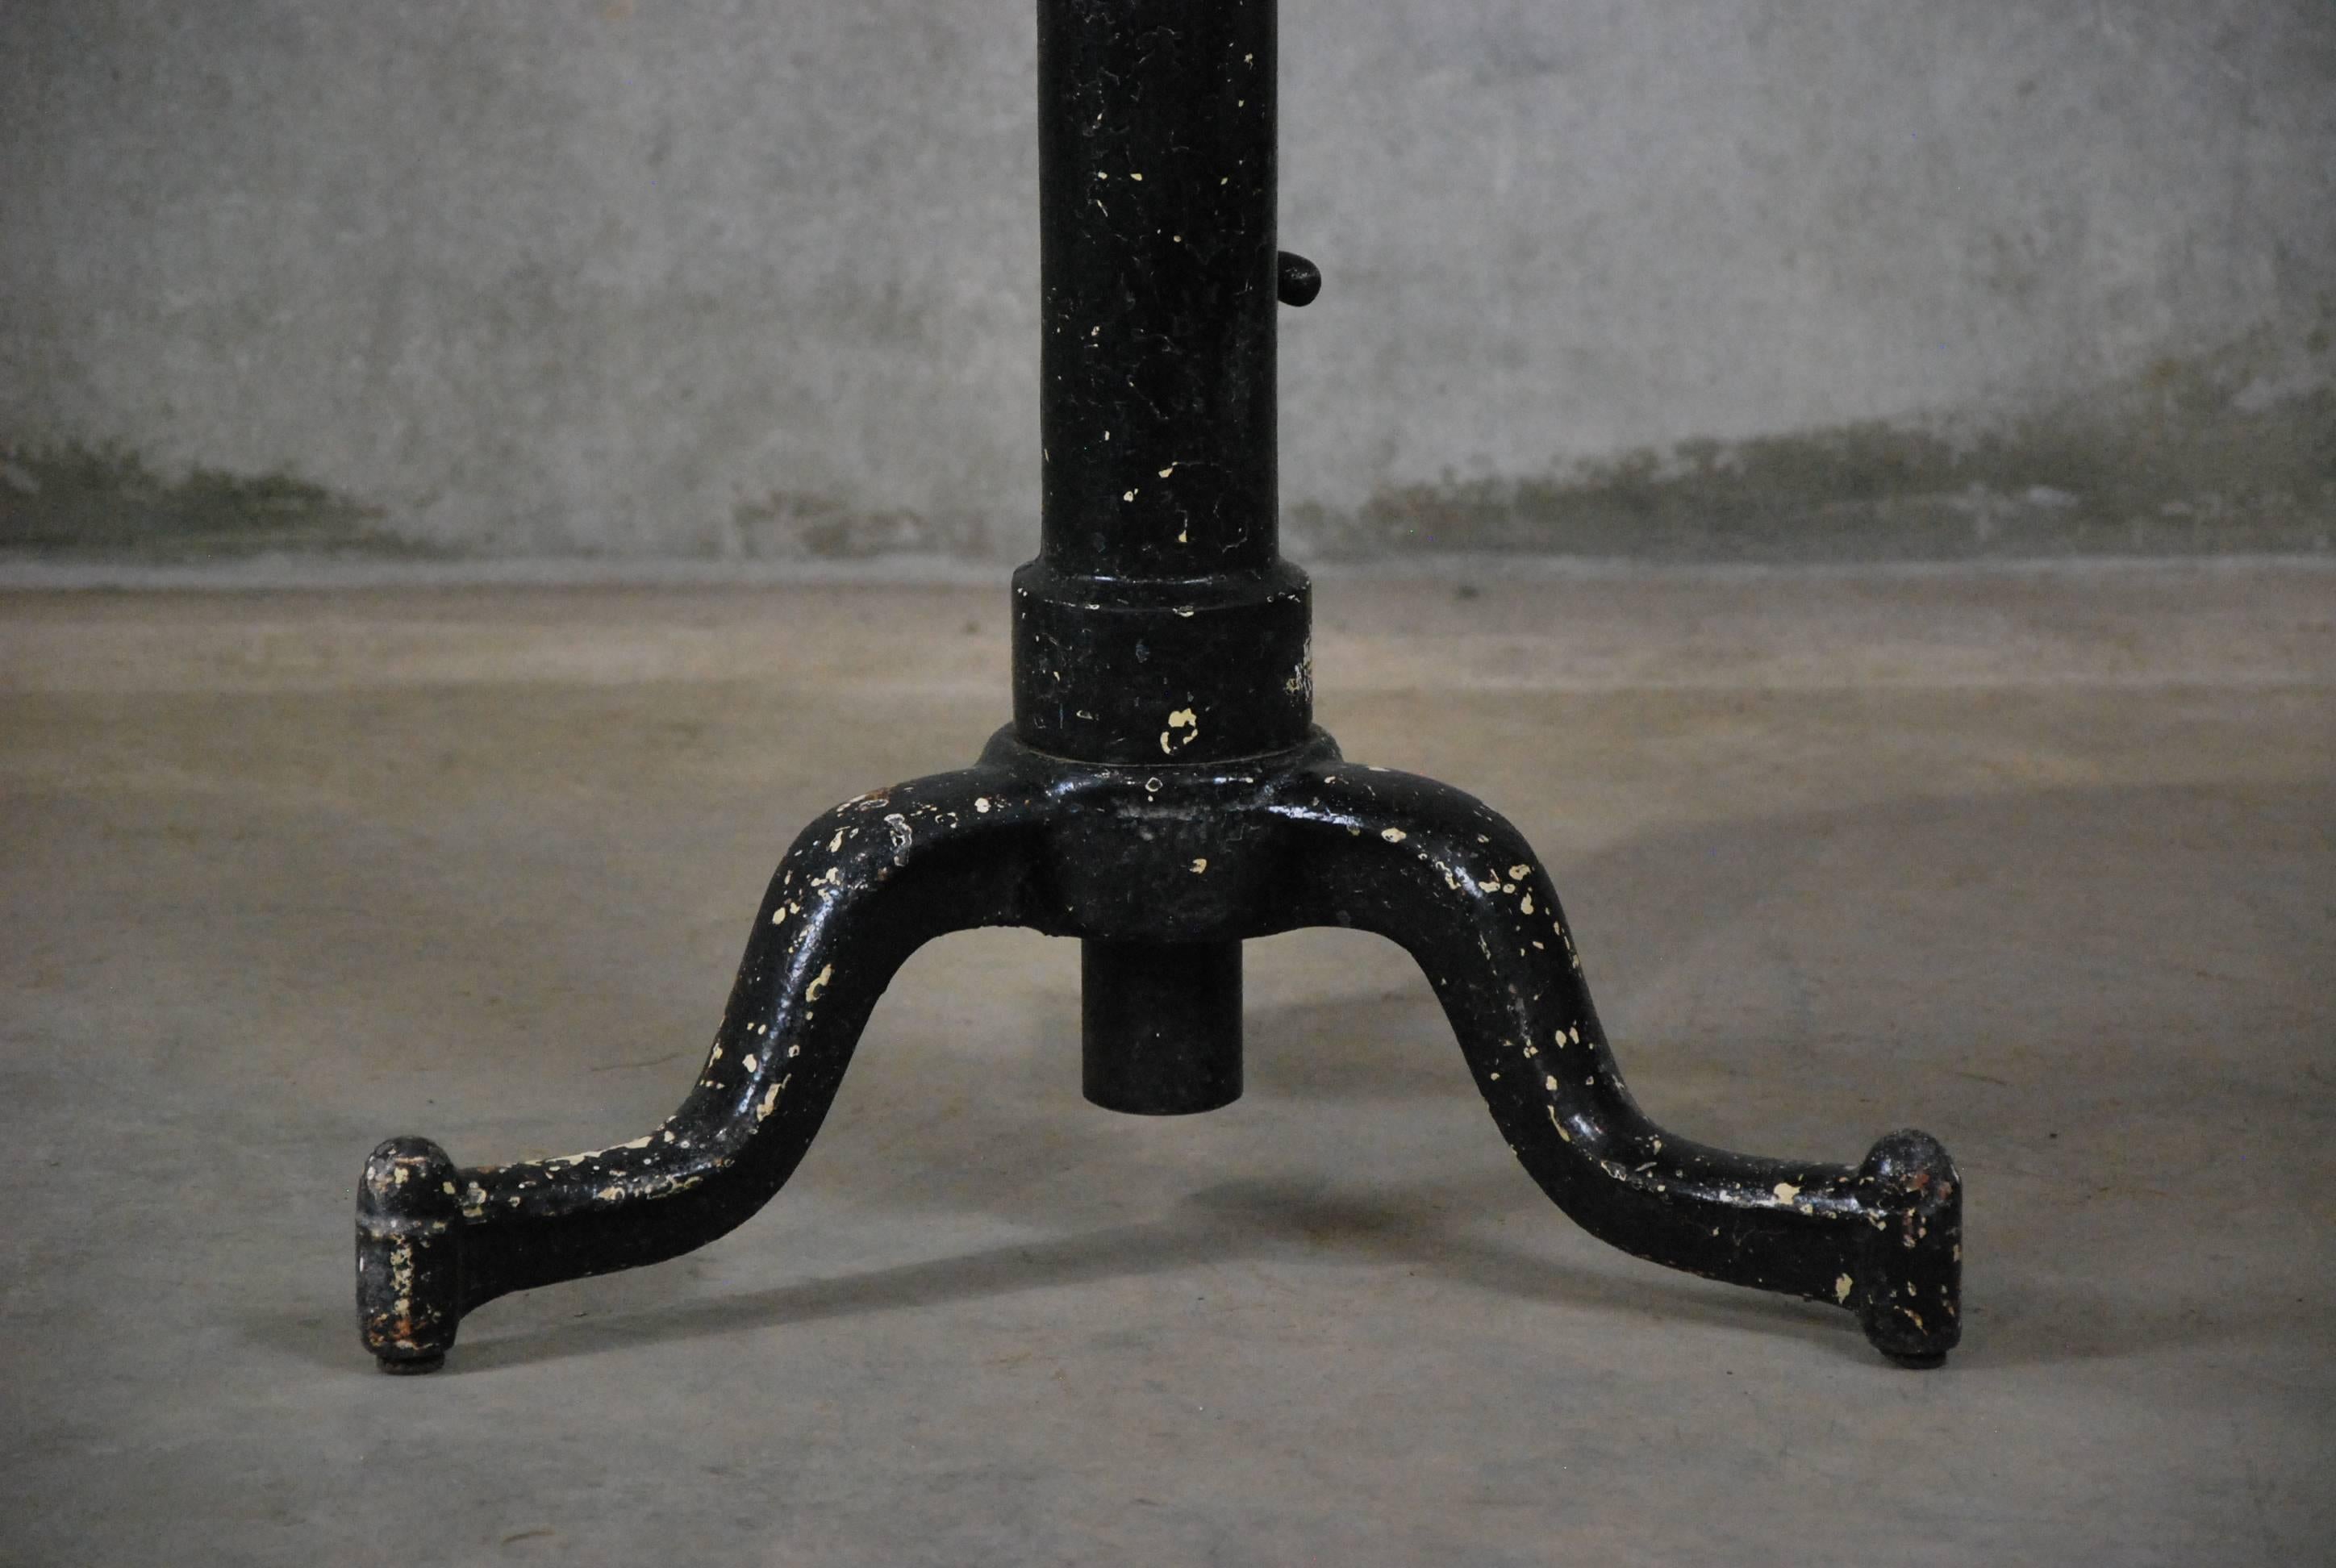 Tripod pedestal base with adjustable mechanism allowing for the movement of height between 22-34